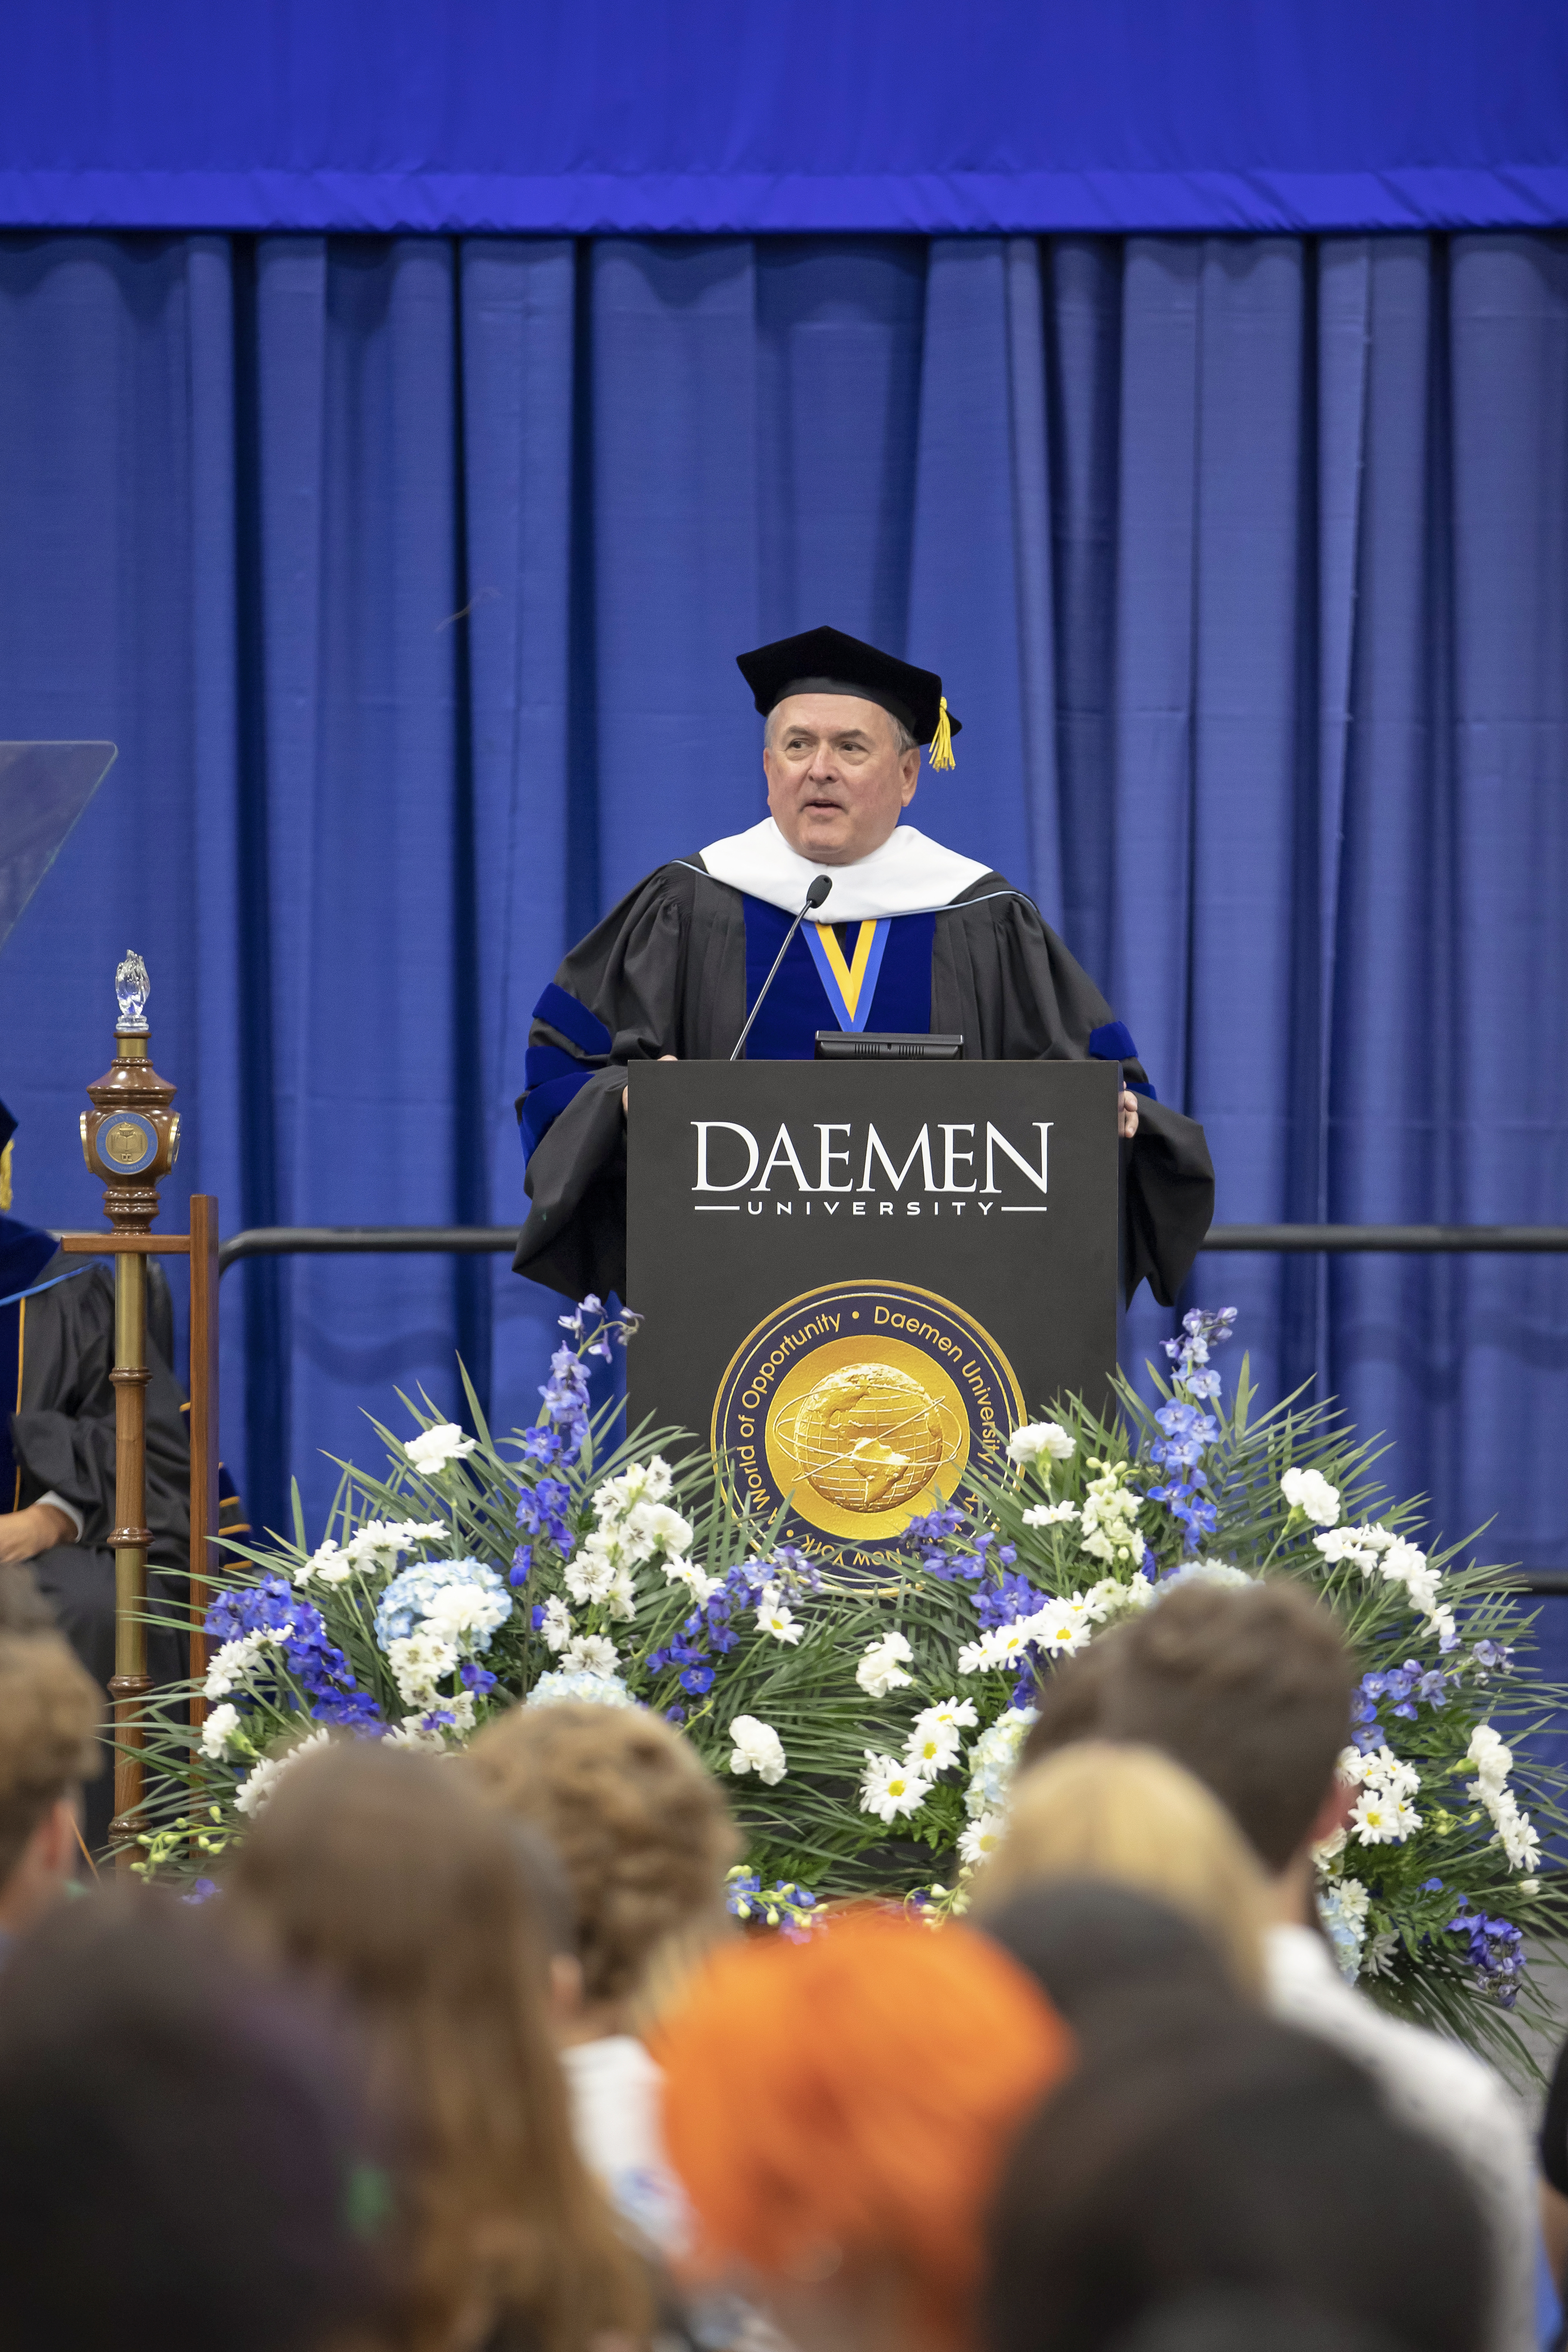 John Yurtchuk speaking from a podium at commencement